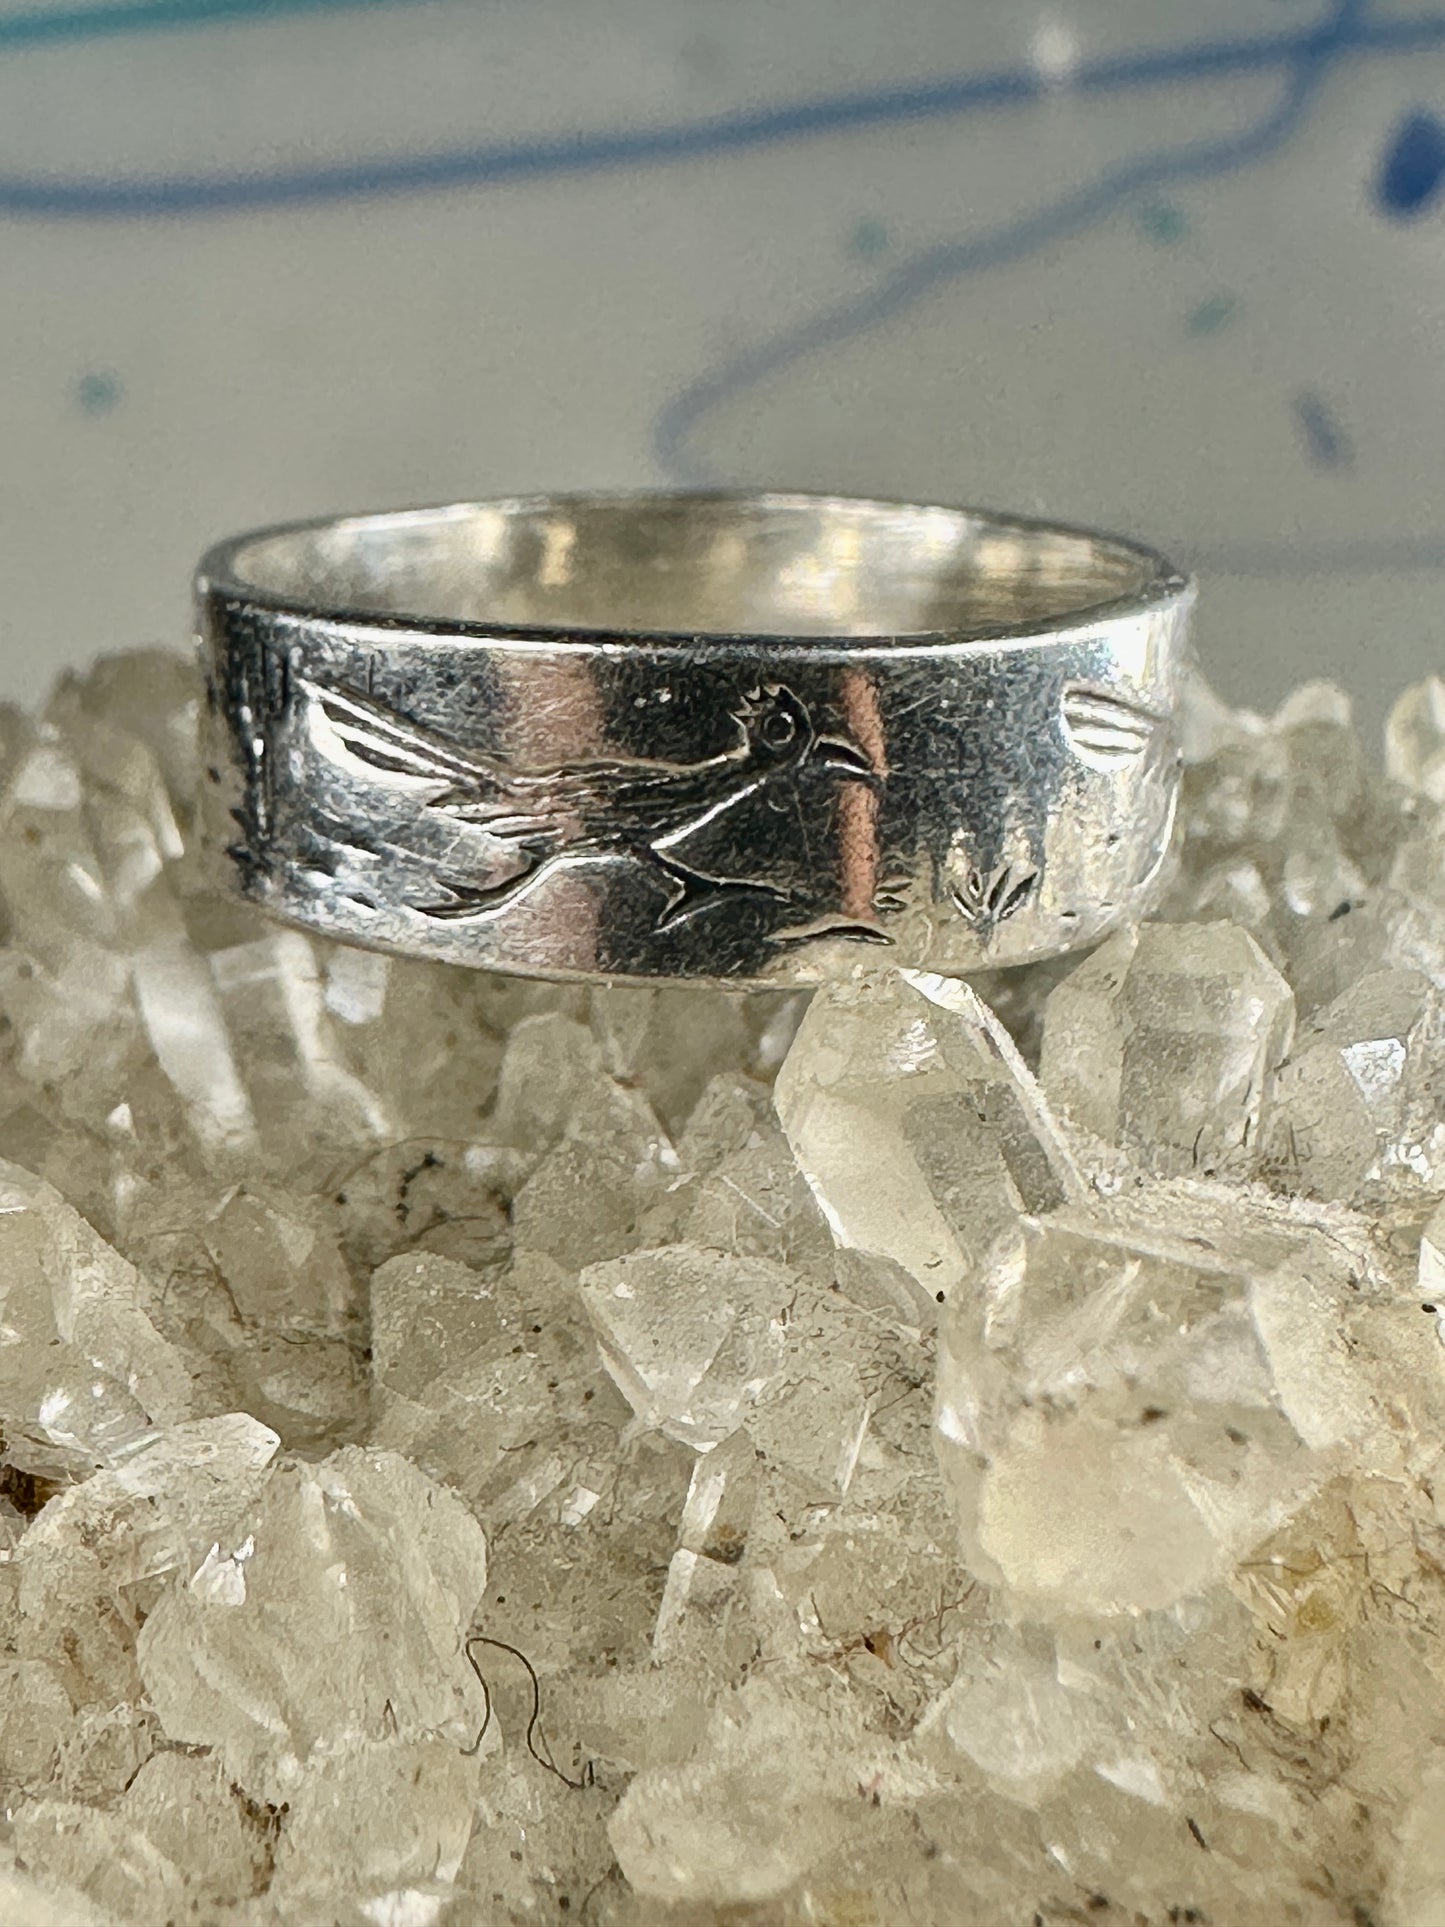 Road Runner ring Bell Trading band Saguaro Cactus Desert size 6 pinky sterling silver